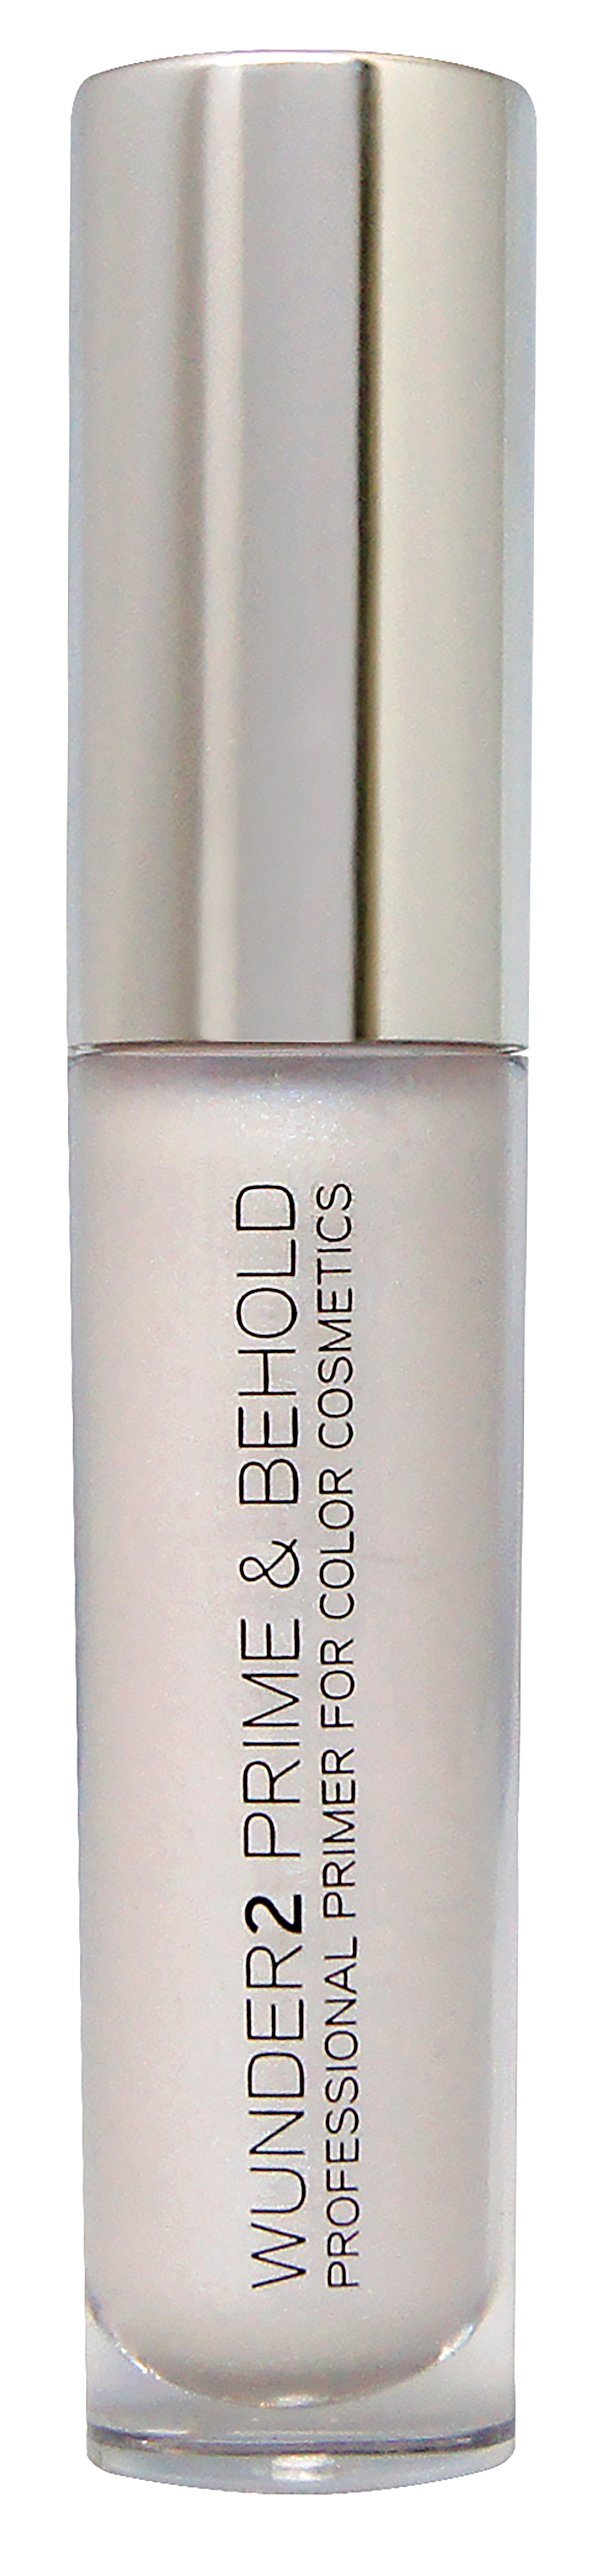 WUNDERBROW PRIME & BEHOLD Waterproof Lip and Eyeshadow Primer Makeup for Color Cosmetics